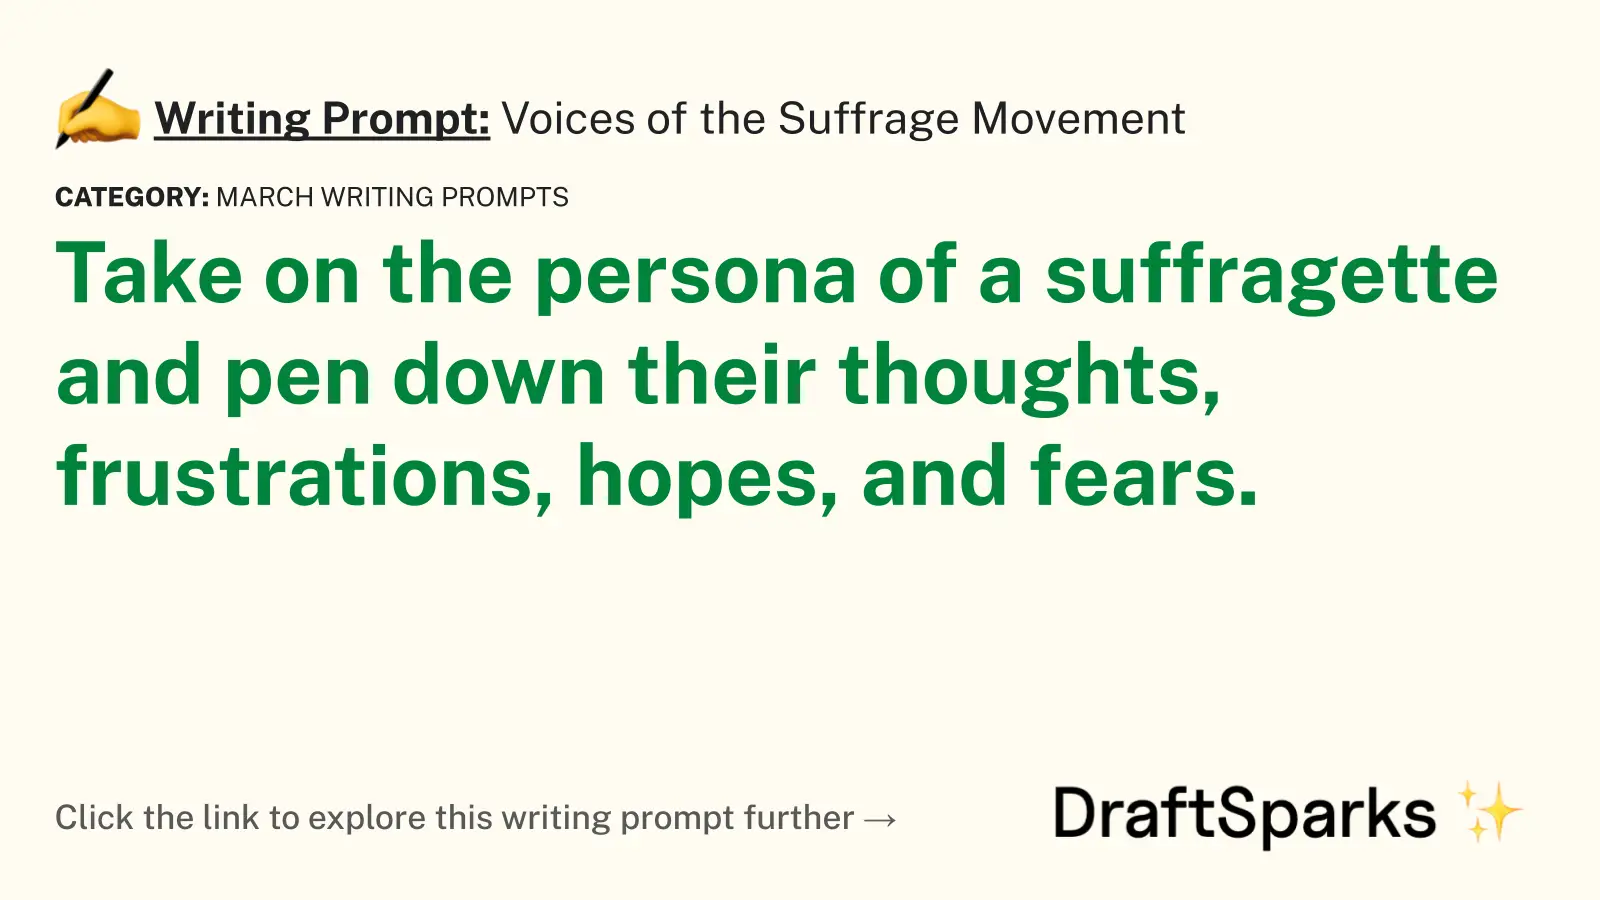 Voices of the Suffrage Movement